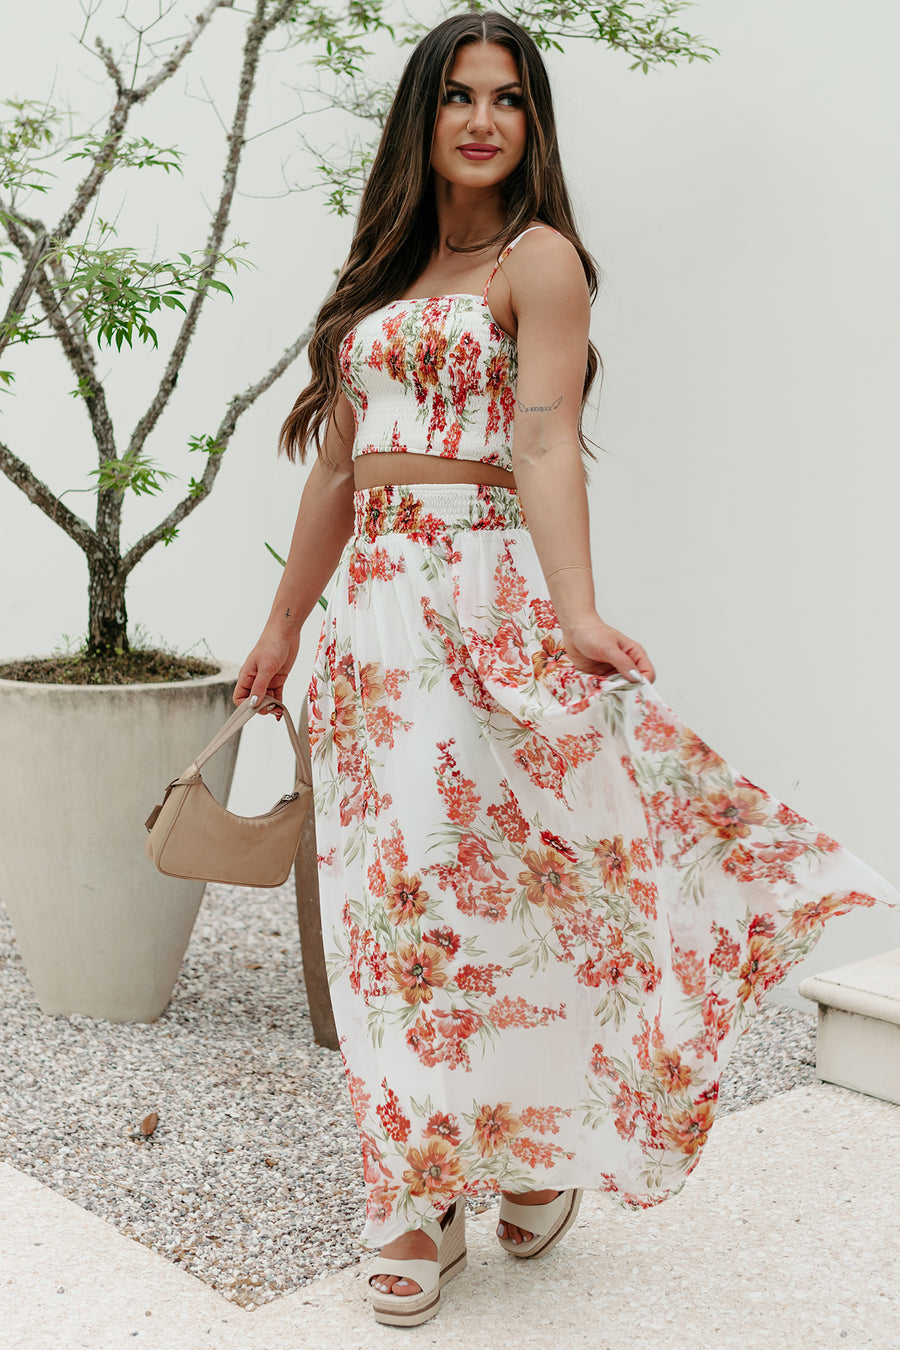 Sunshine Dreaming Floral Two-Piece Skirt Set (Cream)